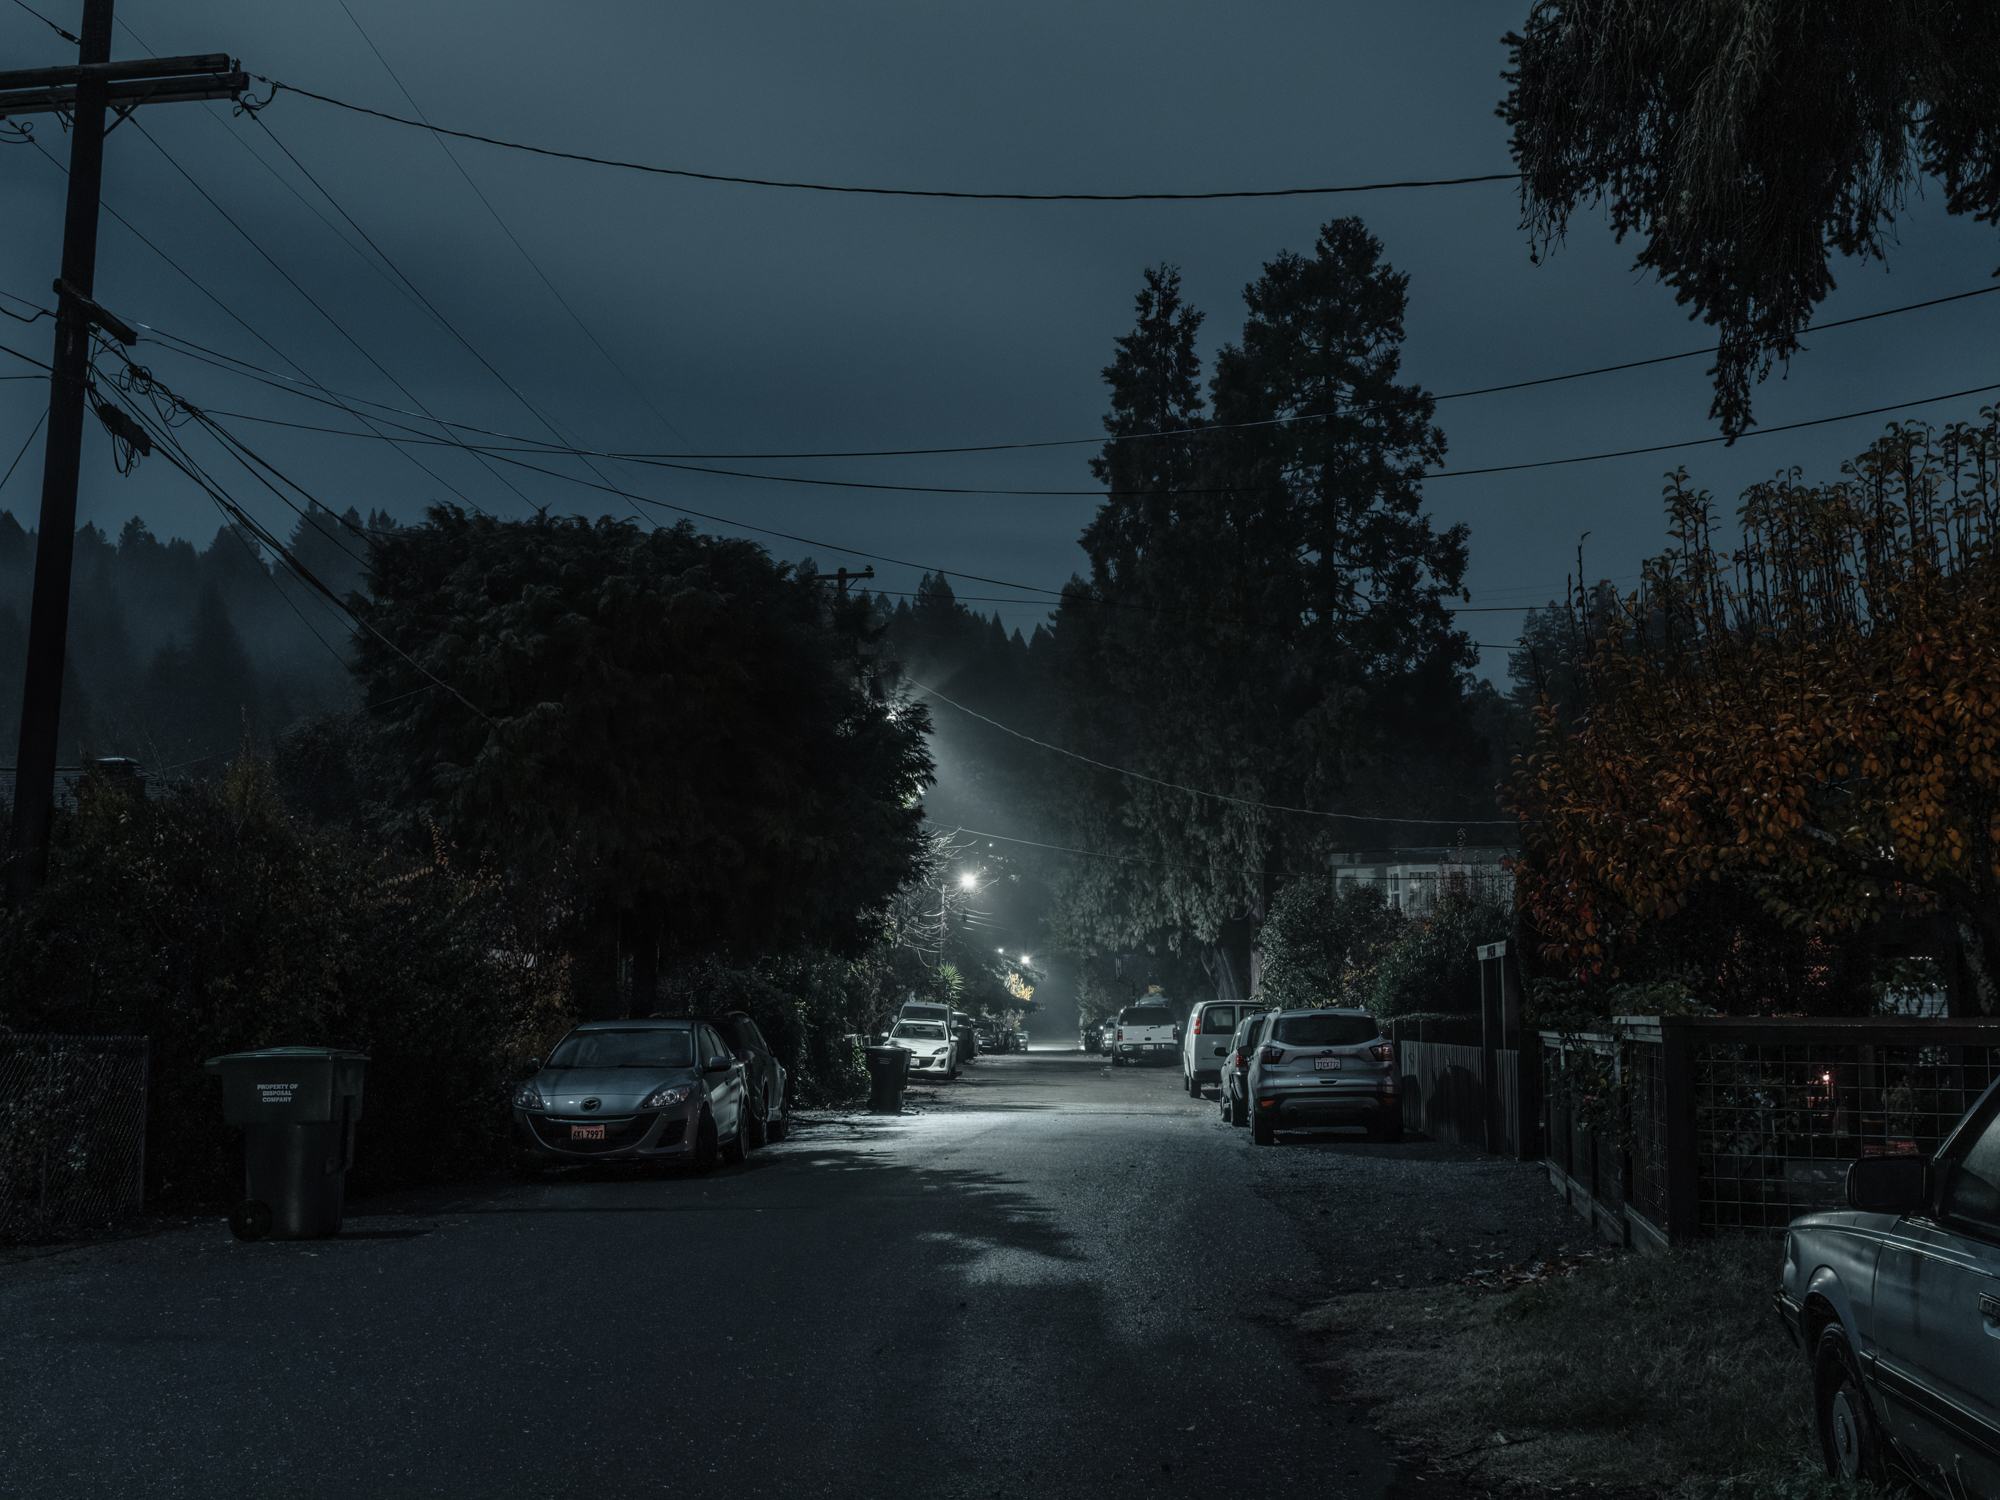    View down Eastern Ave, Guerneville, CA, 2018   .  Archival Pigment Print.  30” x 40” - Limited Edition of 2 | 24” x 32” - Limited Edition of 3 | 18” x 24” - Limited Edition of 5  Pricing &amp; Purchase Info:  Leon Gallery  